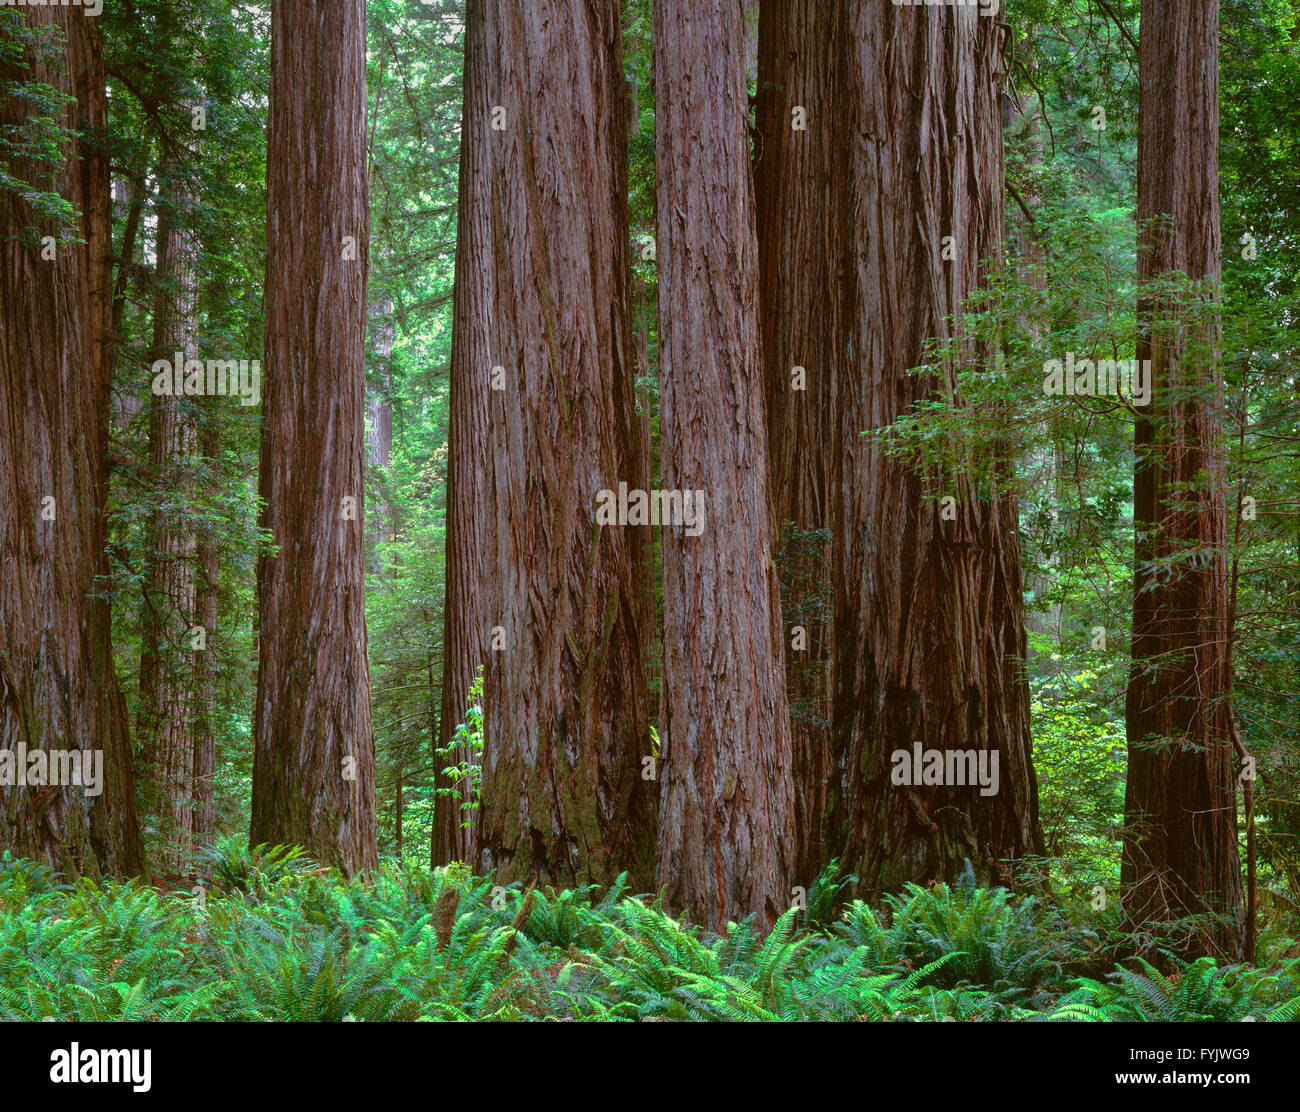 USA, California, Jedediah Smith State Park, Ancient redwoods  tower above ferns in understory at the Stout Grove. Stock Photo